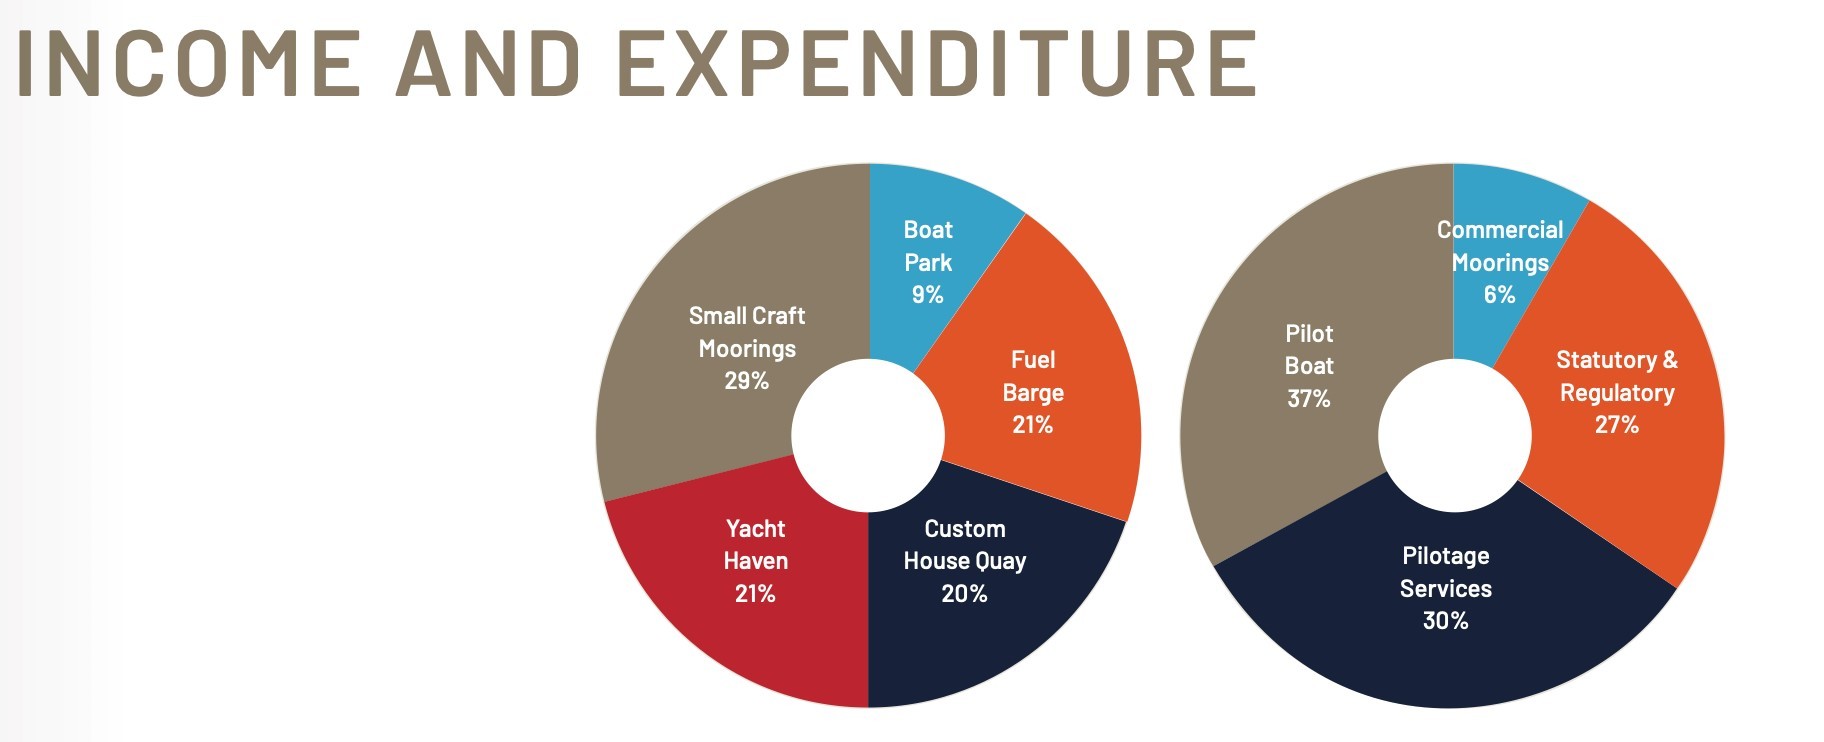 Pie charts showing income and expenditure Image: Falmouth Harbour